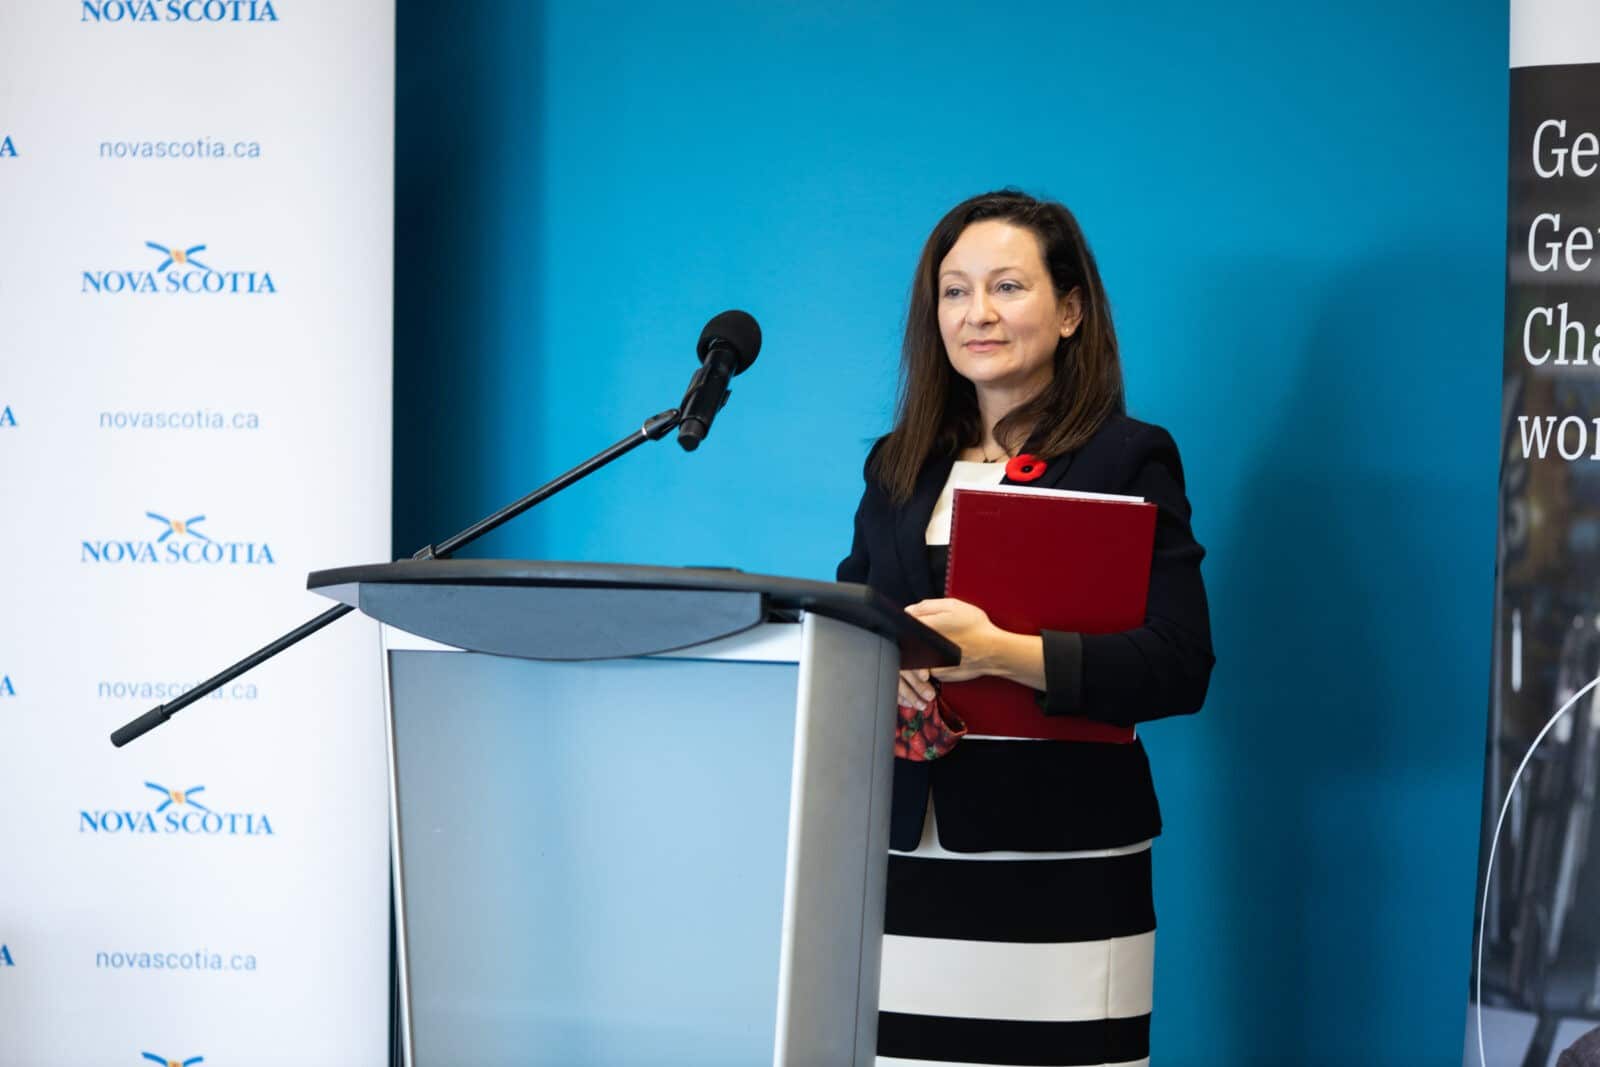 Image of Diana Parks, Halifax’s regional director for NPower Canada, speaking at a podium in a Nova Scotia government conference room